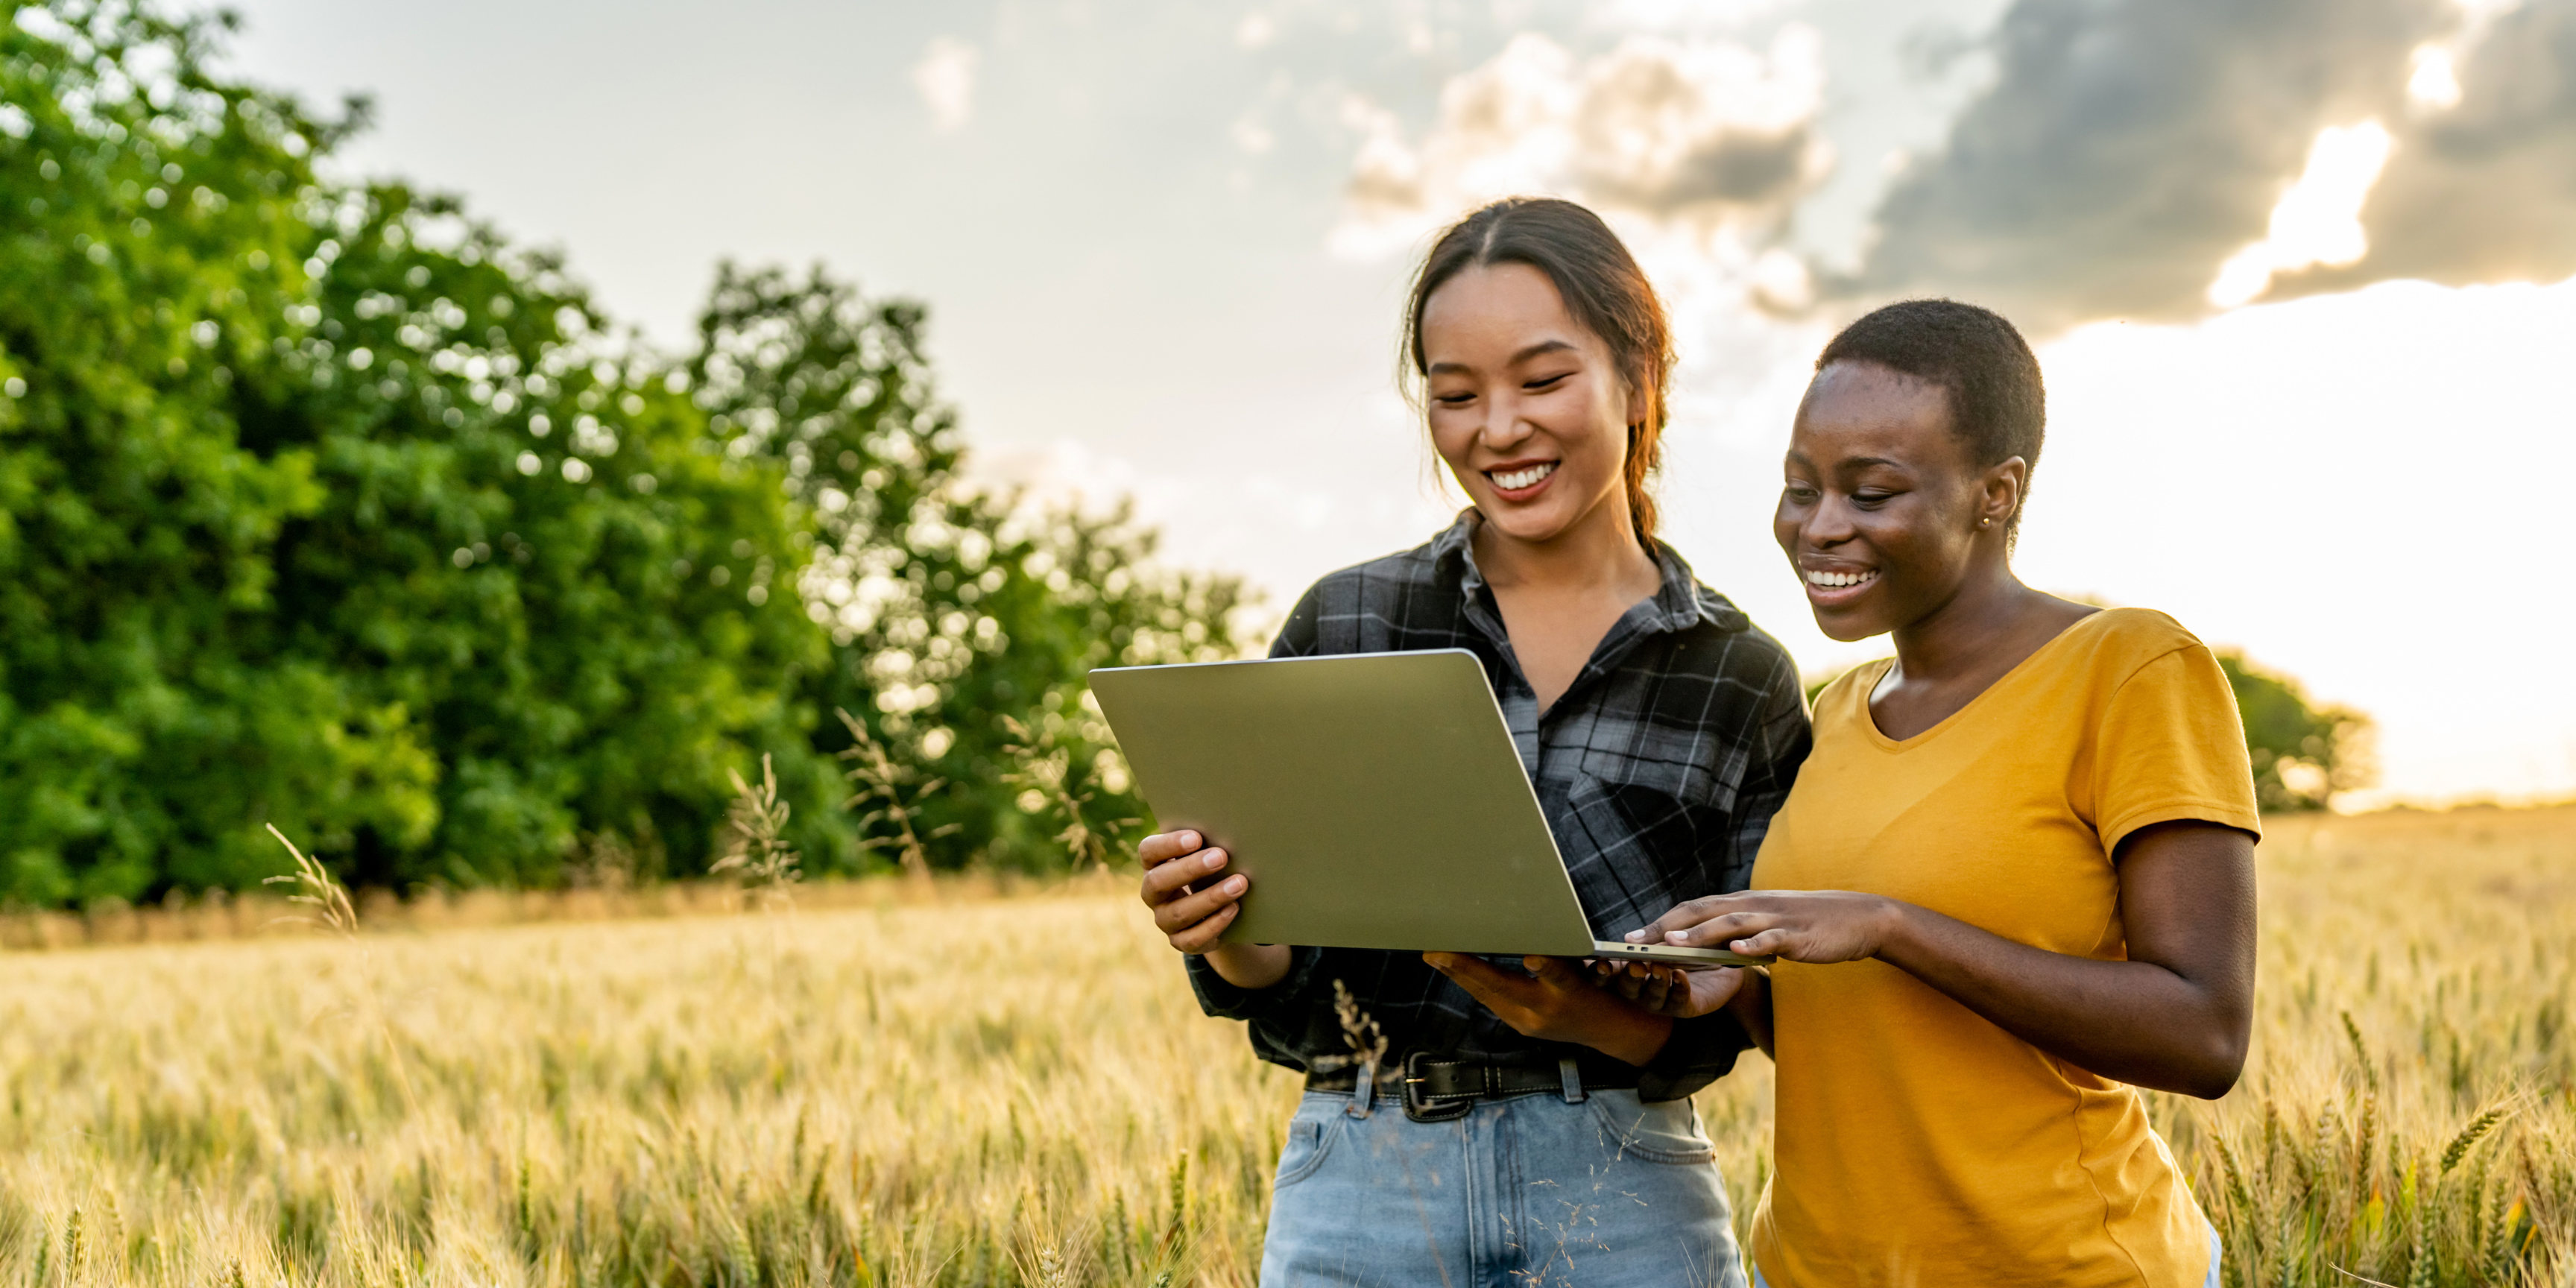 Tech in agriculture is opening up new opportunities